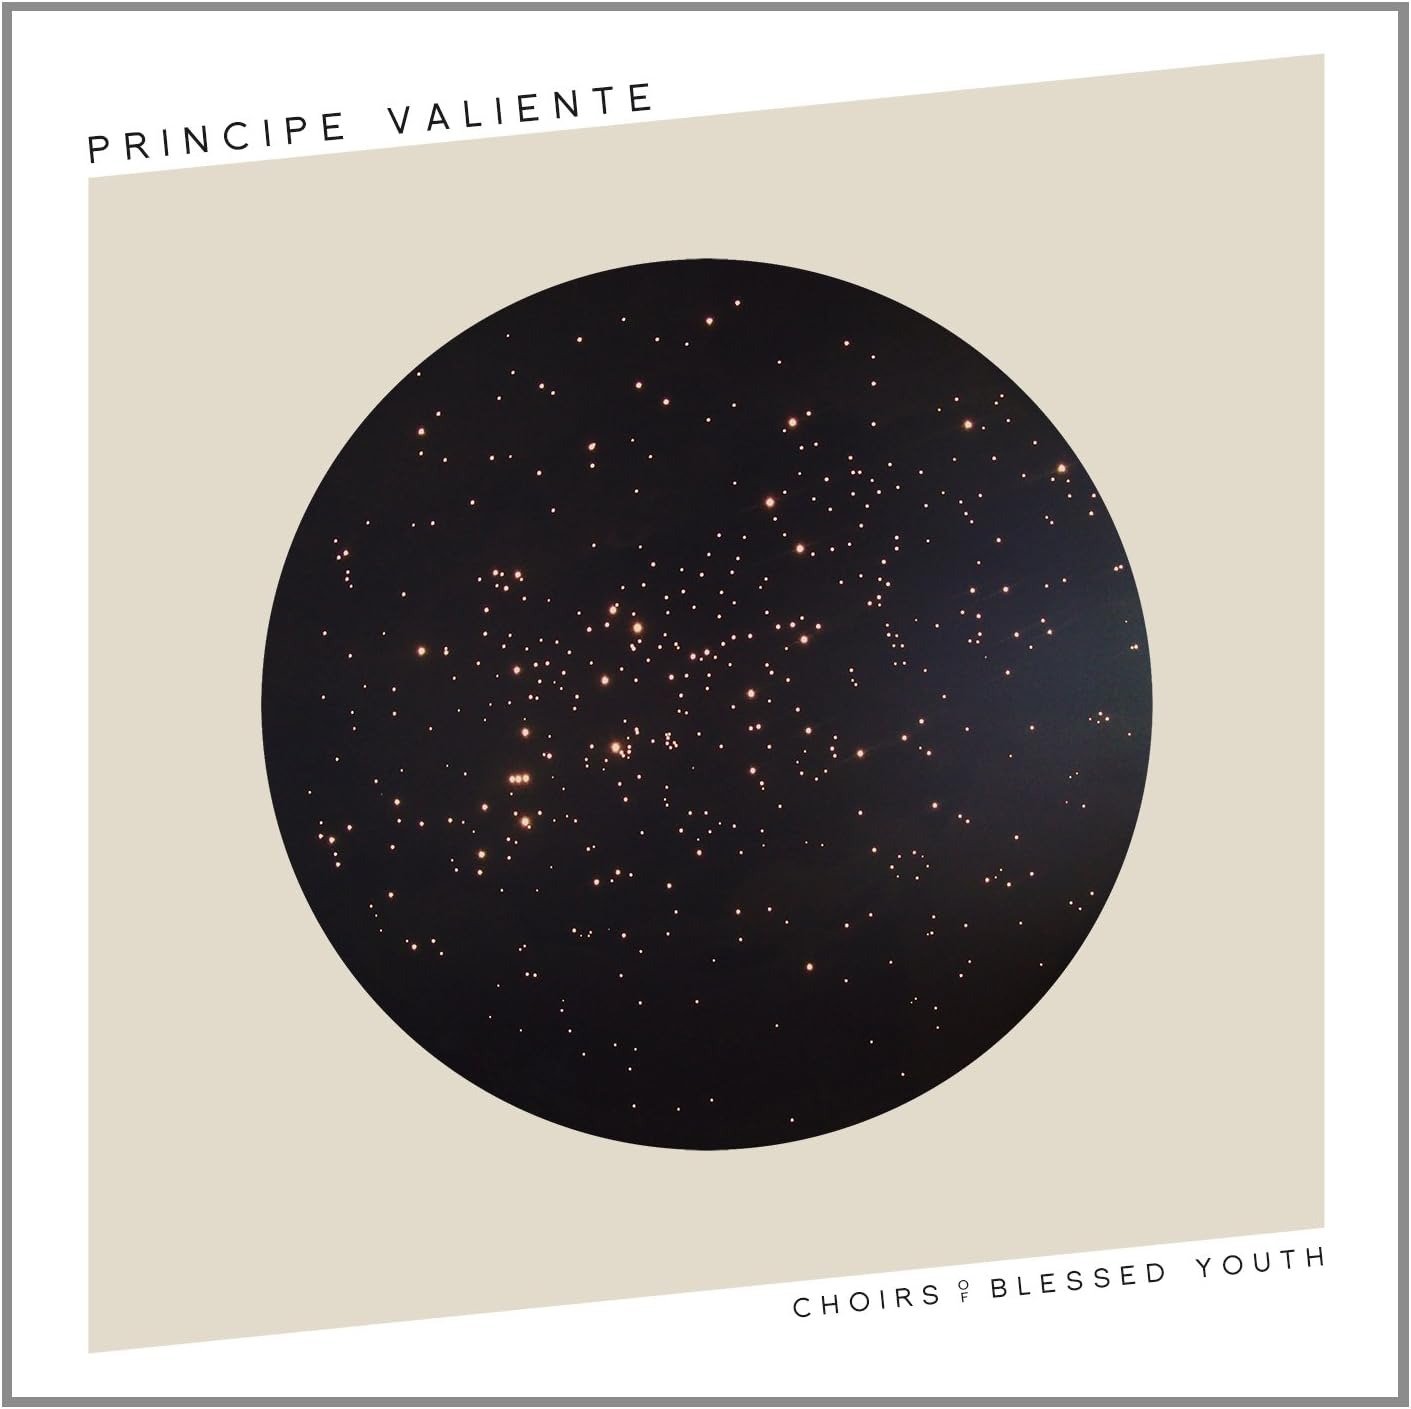 CD Shop - PRINCIPE VALIENTE CHOIRS OF BLESSED YOUTH